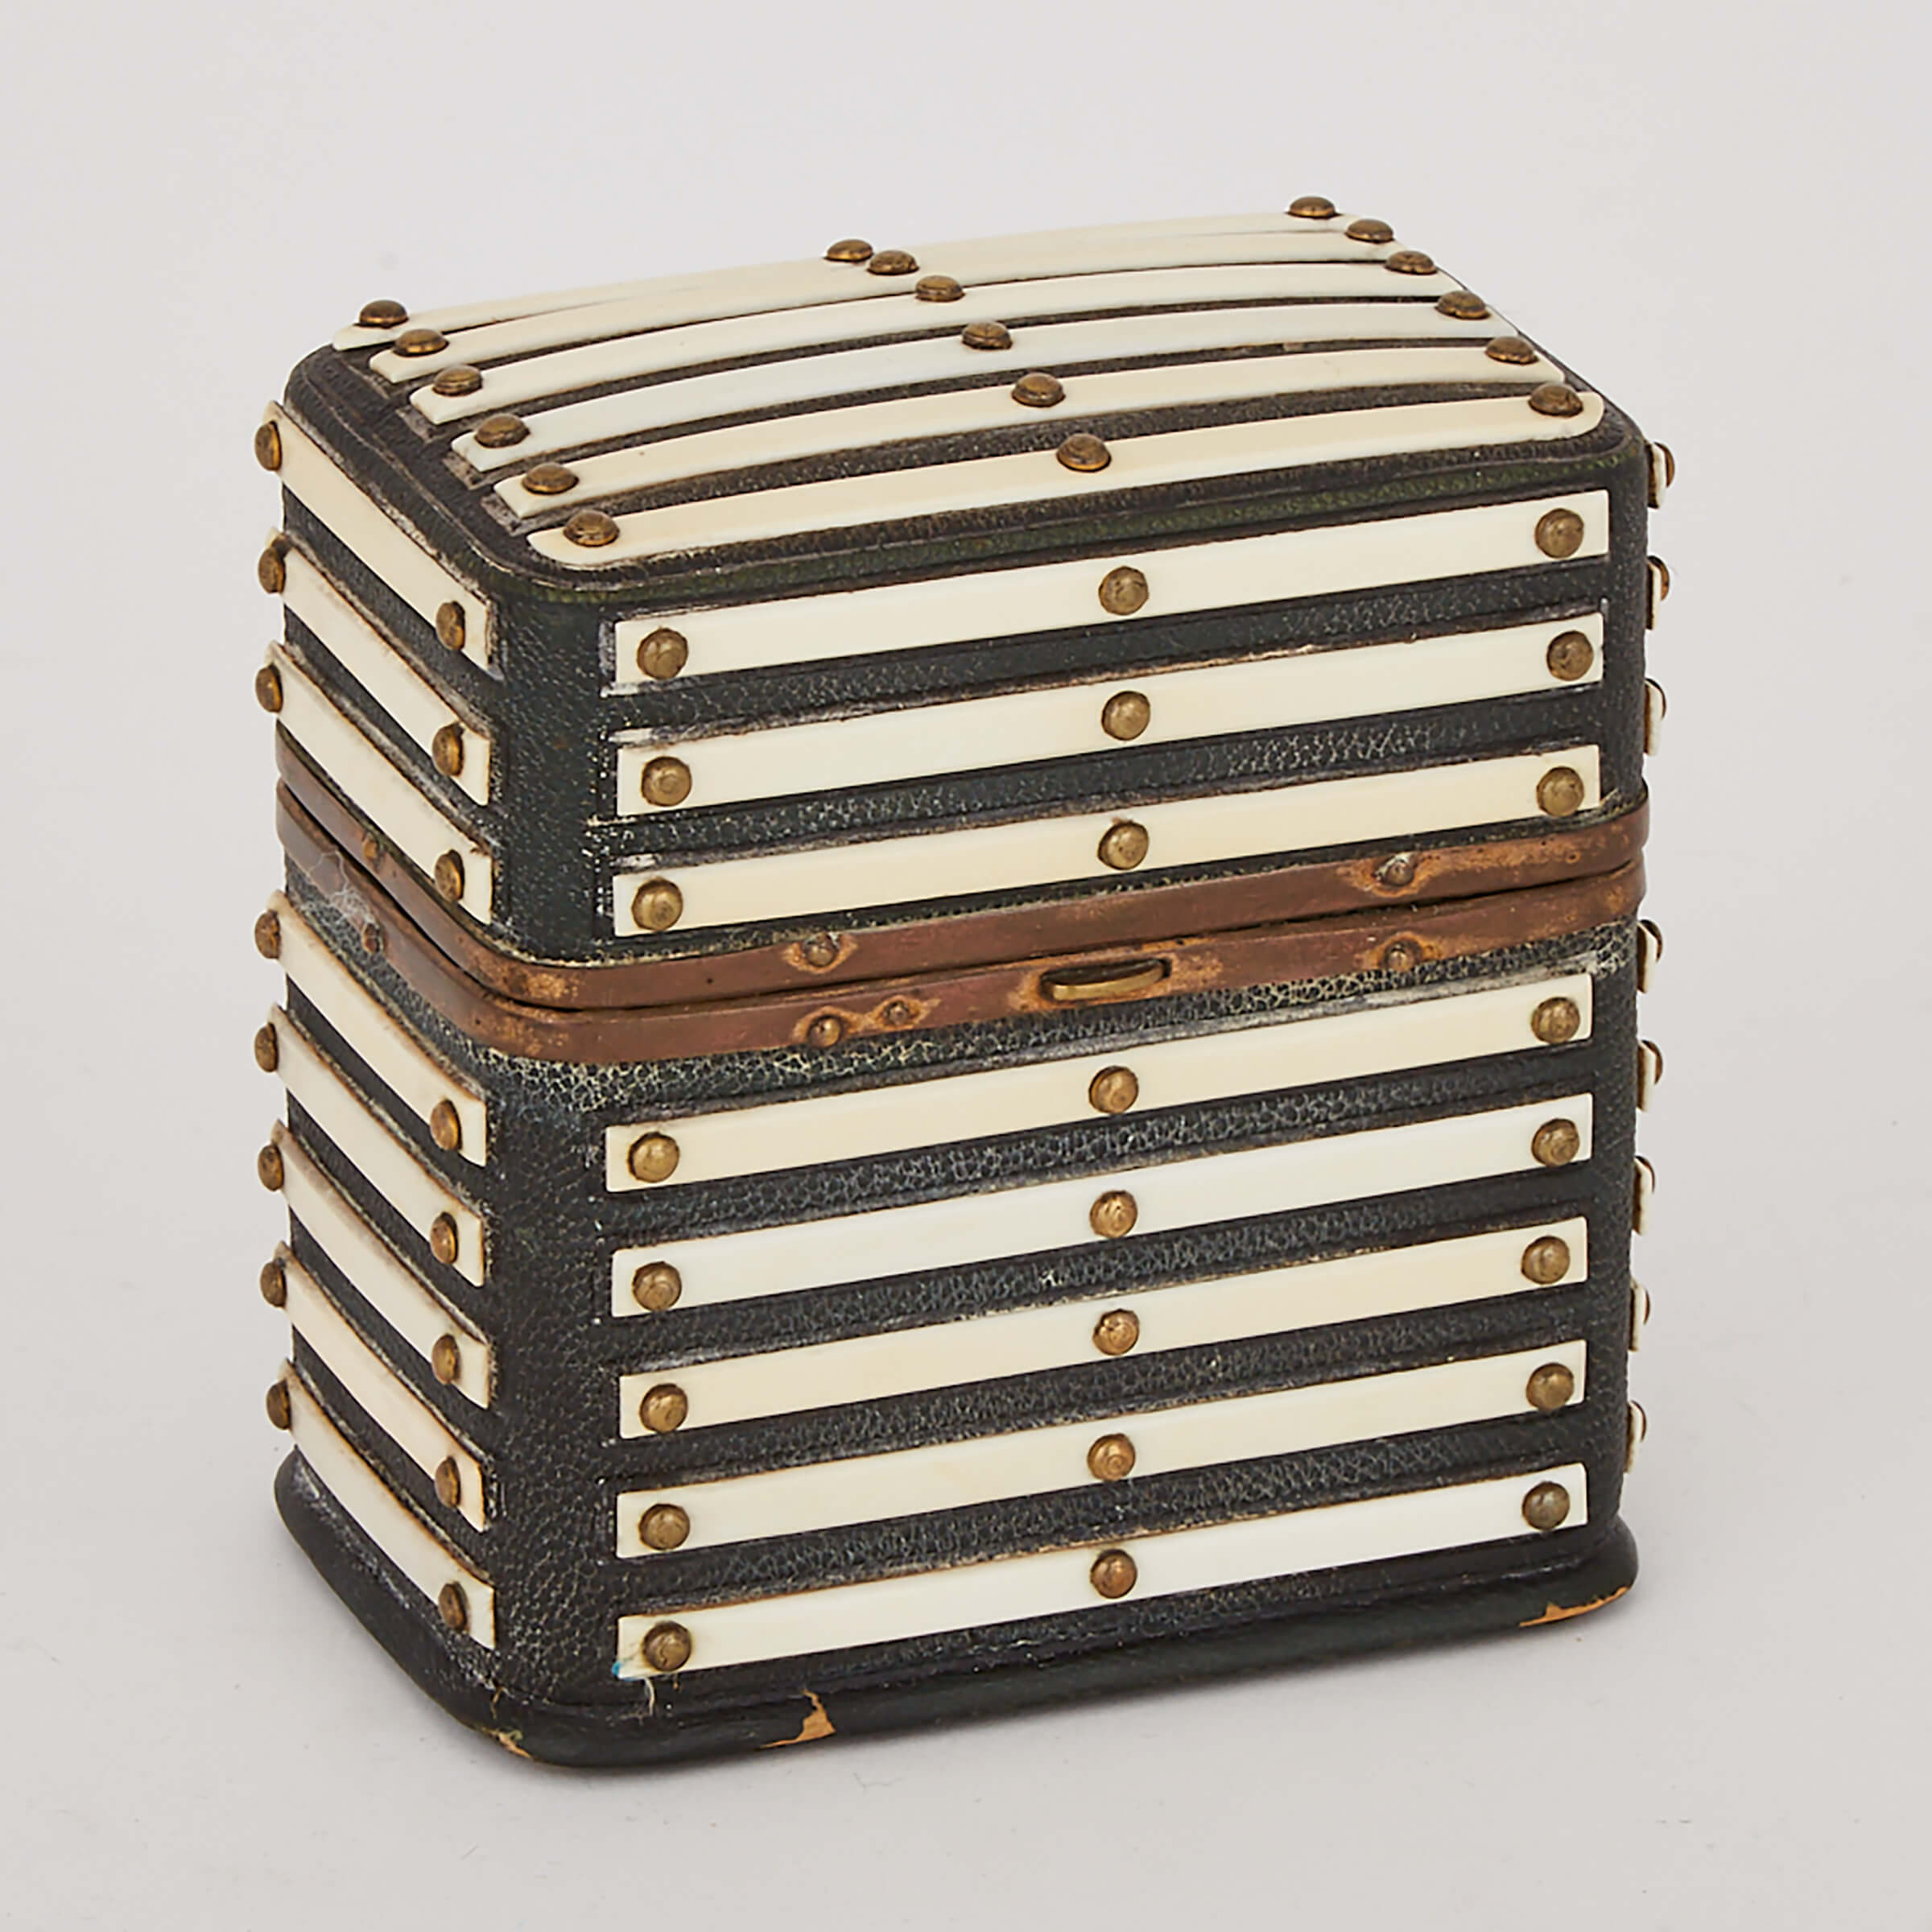 Anglo-Indian Bone Mounted Leather Ink Pot Box, mid 19th century